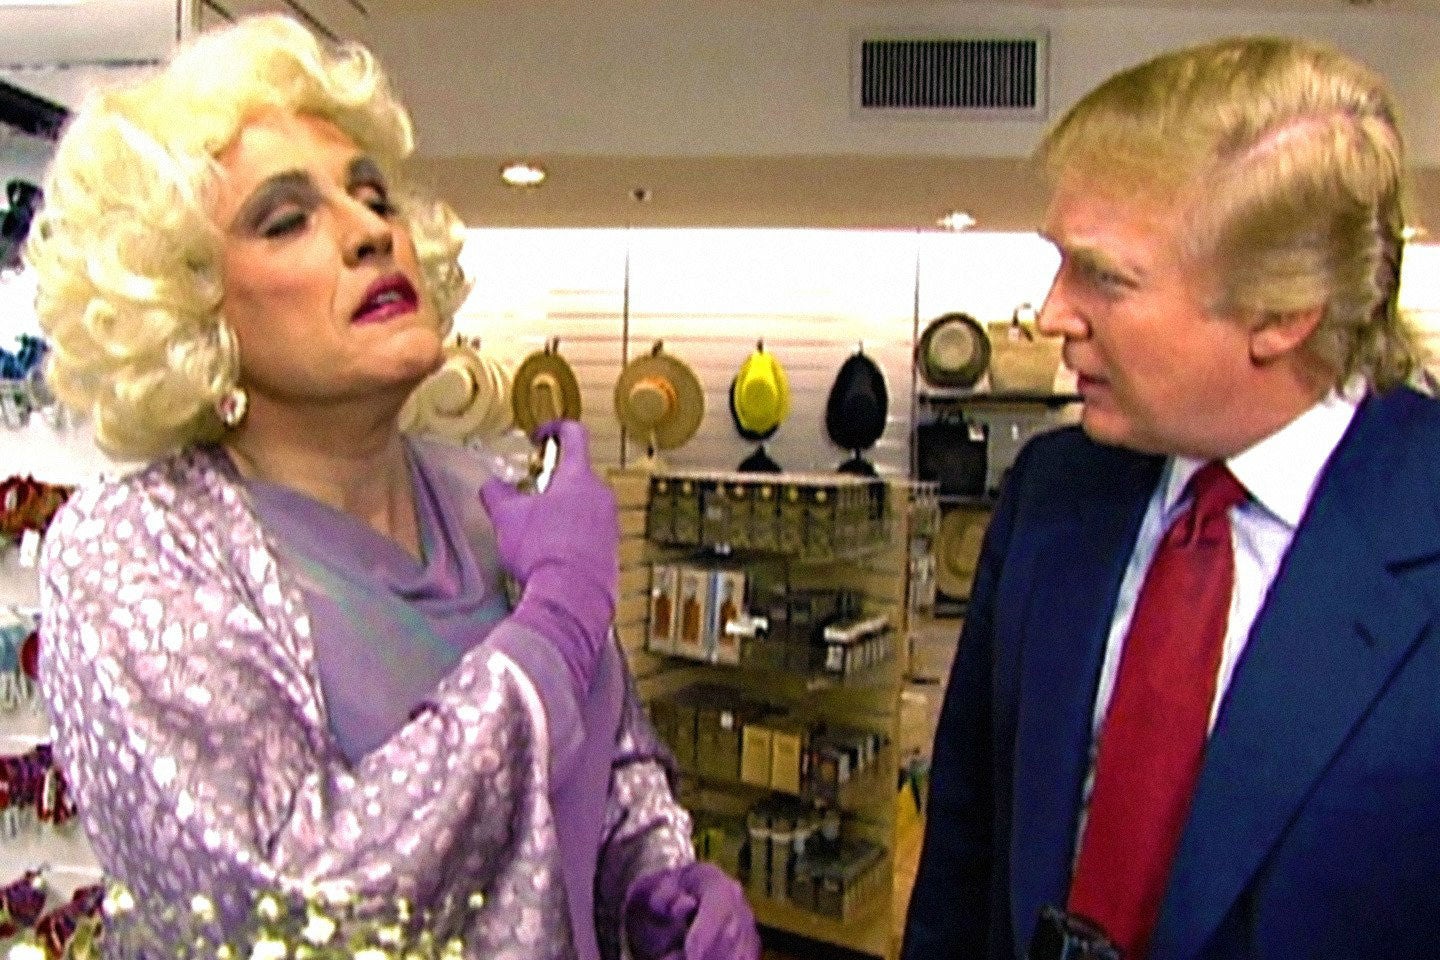 Mr Mayor in drag in a 2000 fundraising skit with Donald Trump